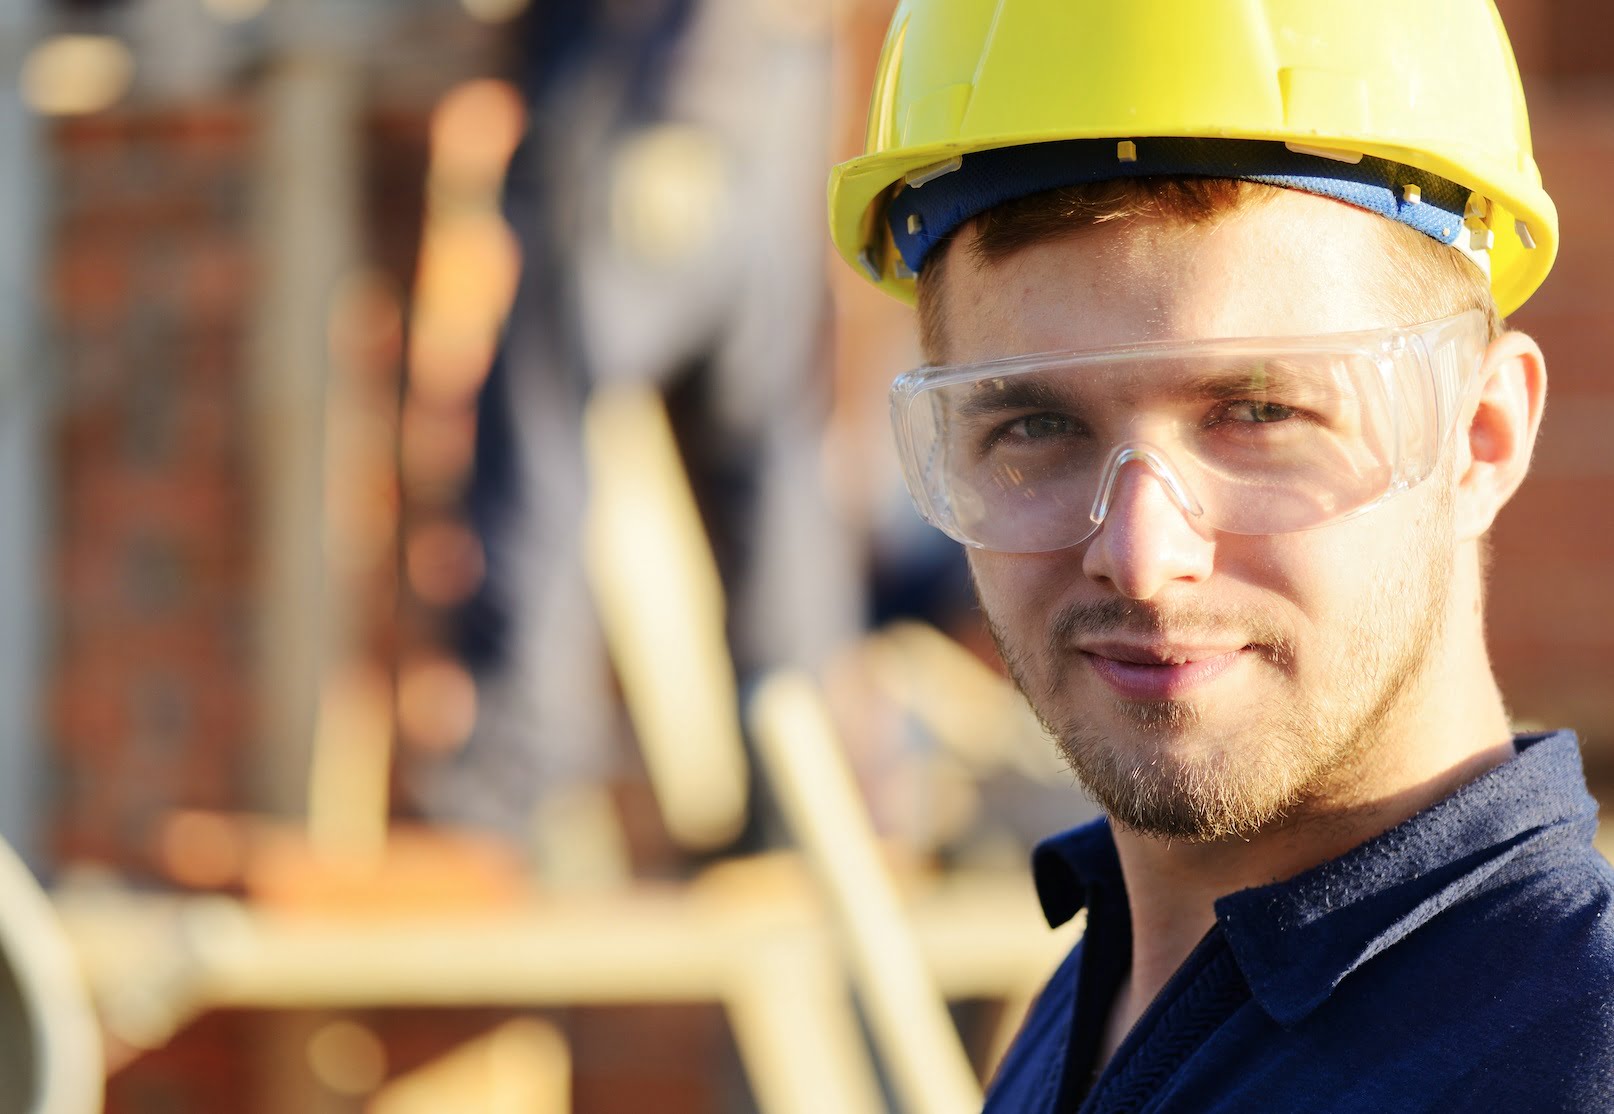 Hearing loss in the workplace: is your job damaging your hearing?